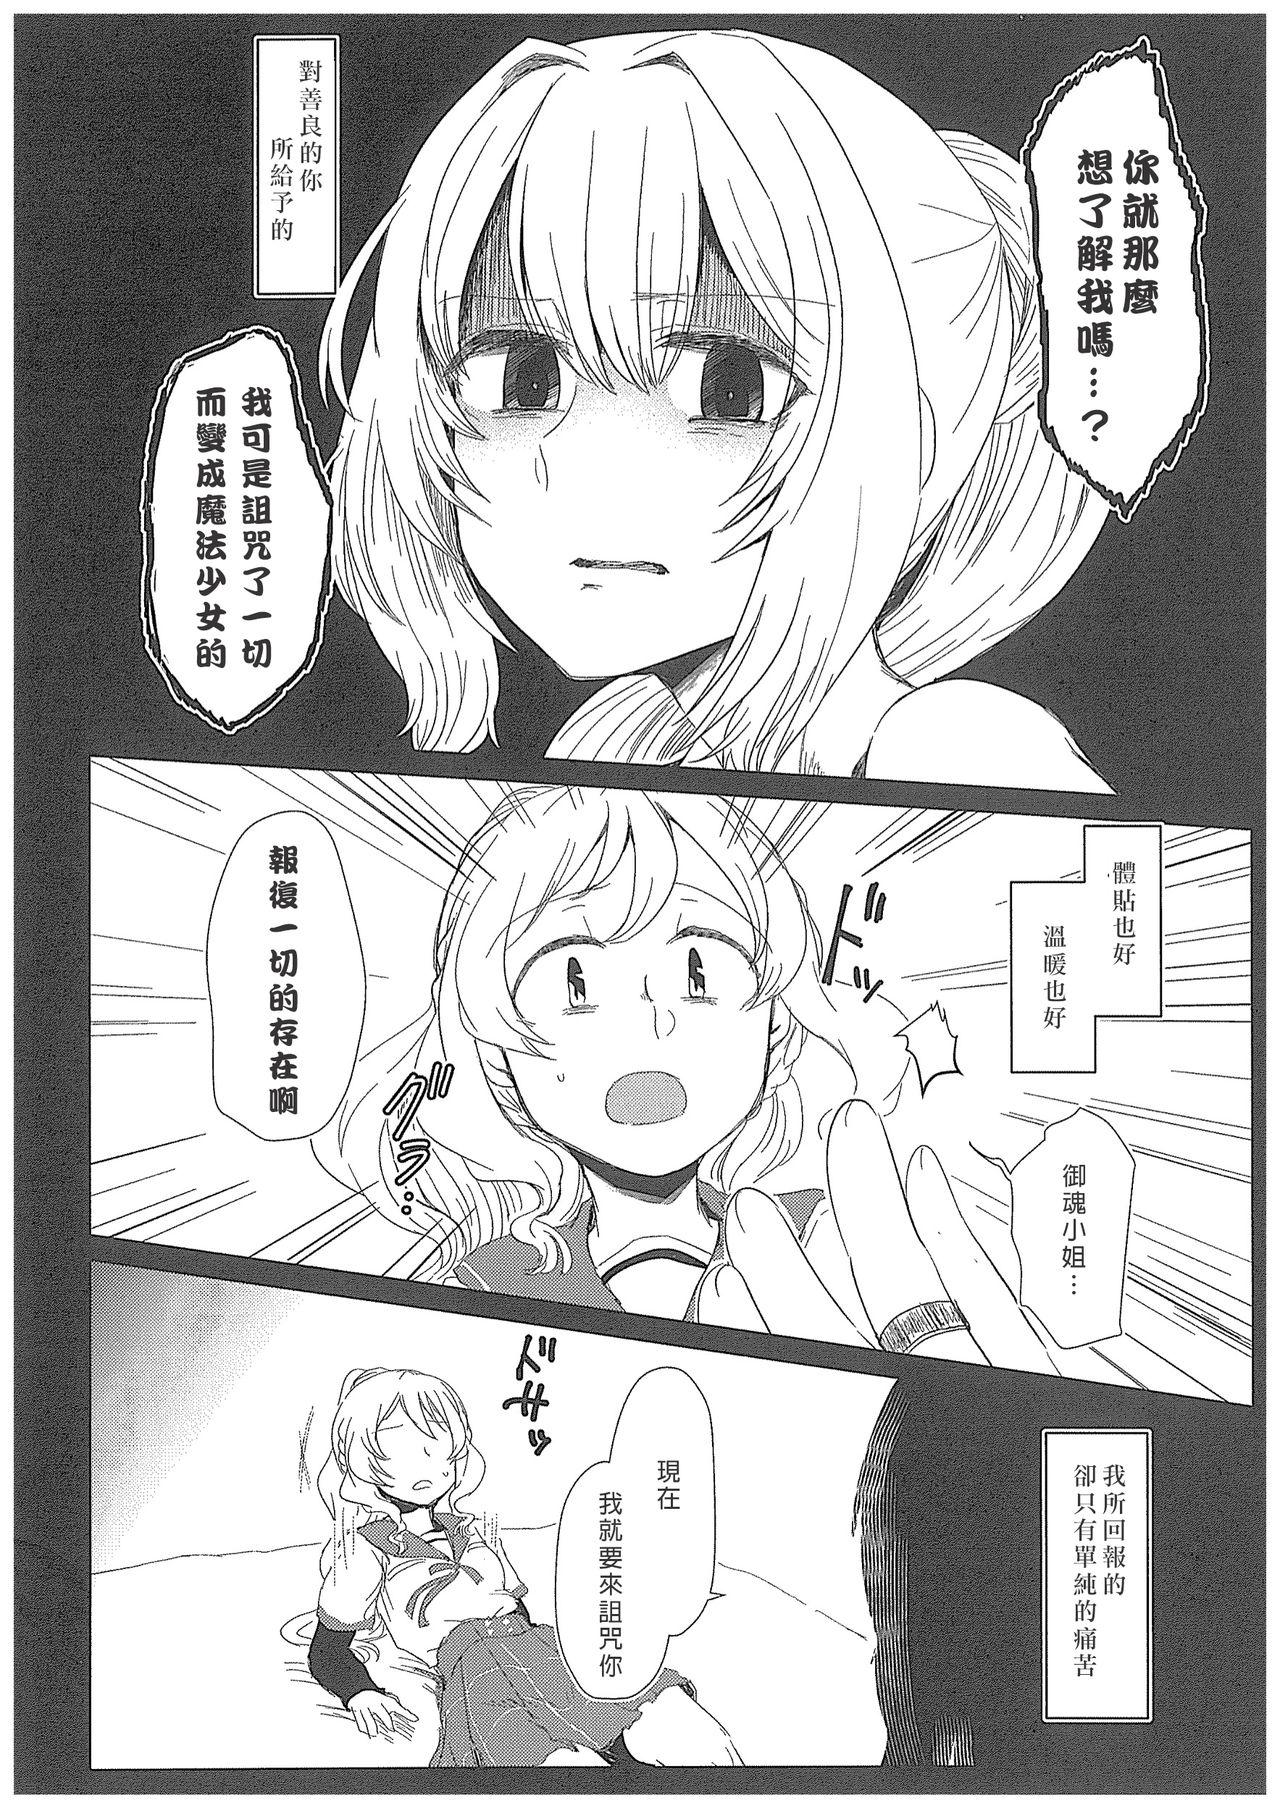 Bangla From nothing,nothing comes|漢堡牛排不能無中生有 - Puella magi madoka magica side story magia record Penis - Page 11